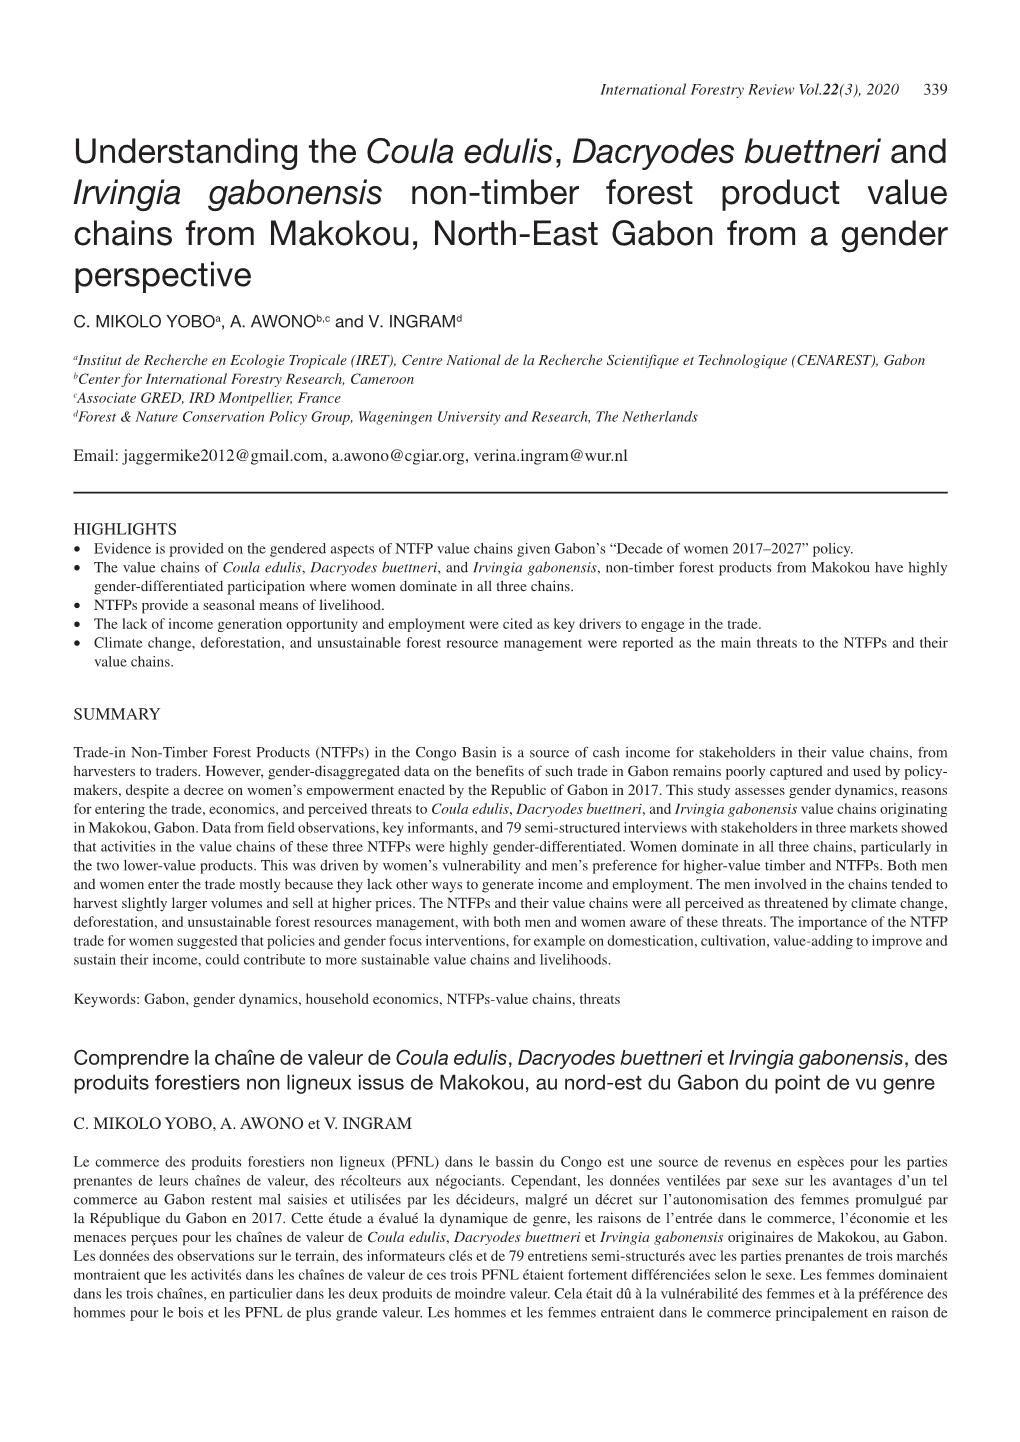 Understanding the Coula Edulis, Dacryodes Buettneri and Irvingia Gabonensis Non-Timber Forest Product Value Chains from Makokou